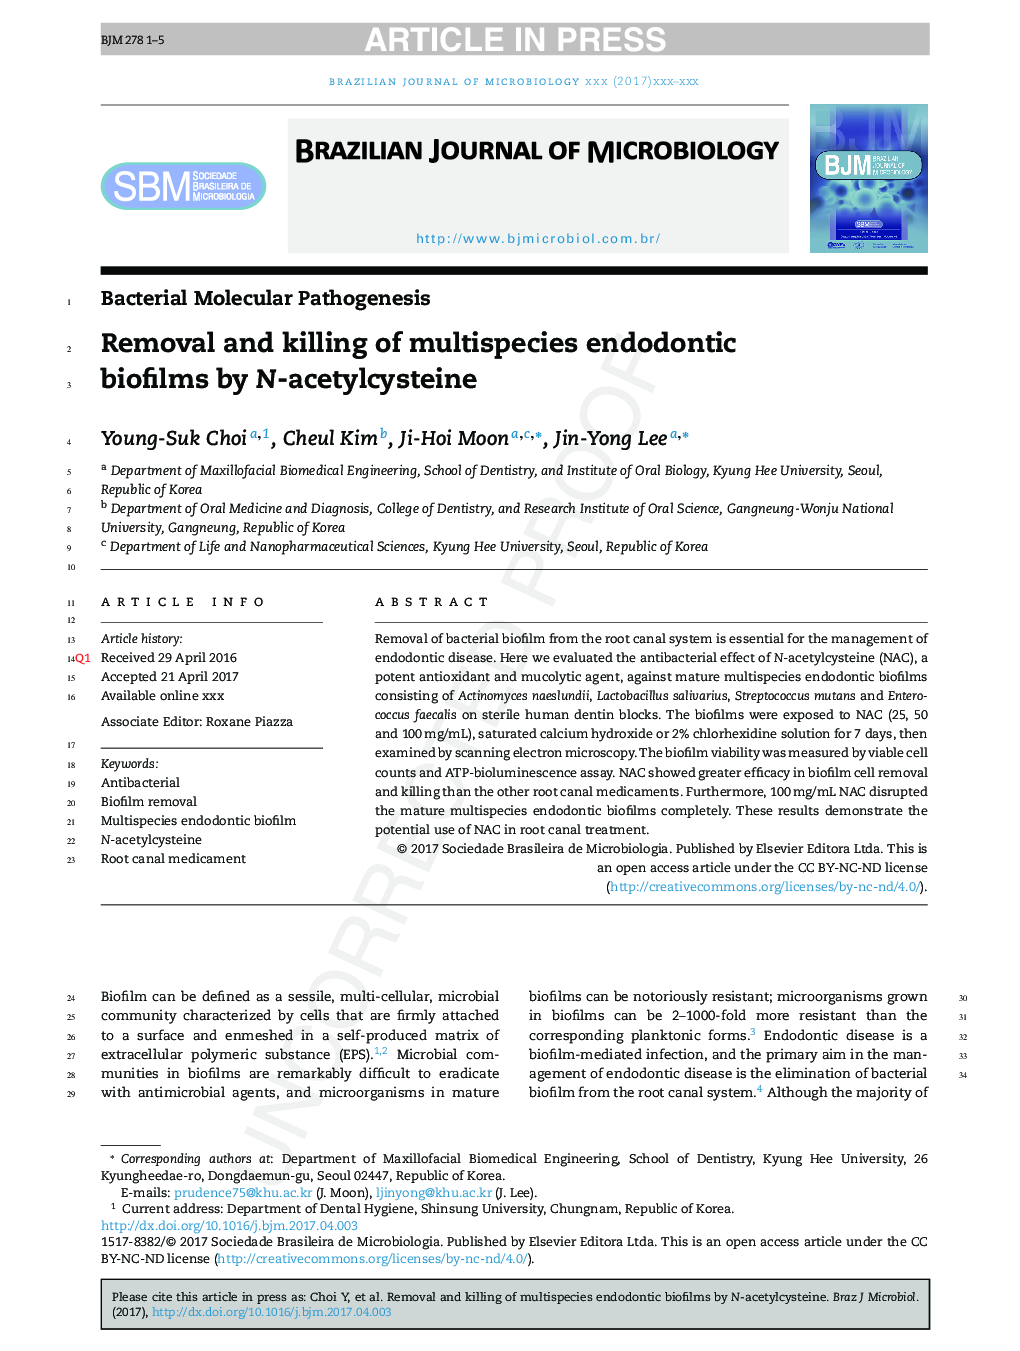 Removal and killing of multispecies endodontic biofilms by N-acetylcysteine